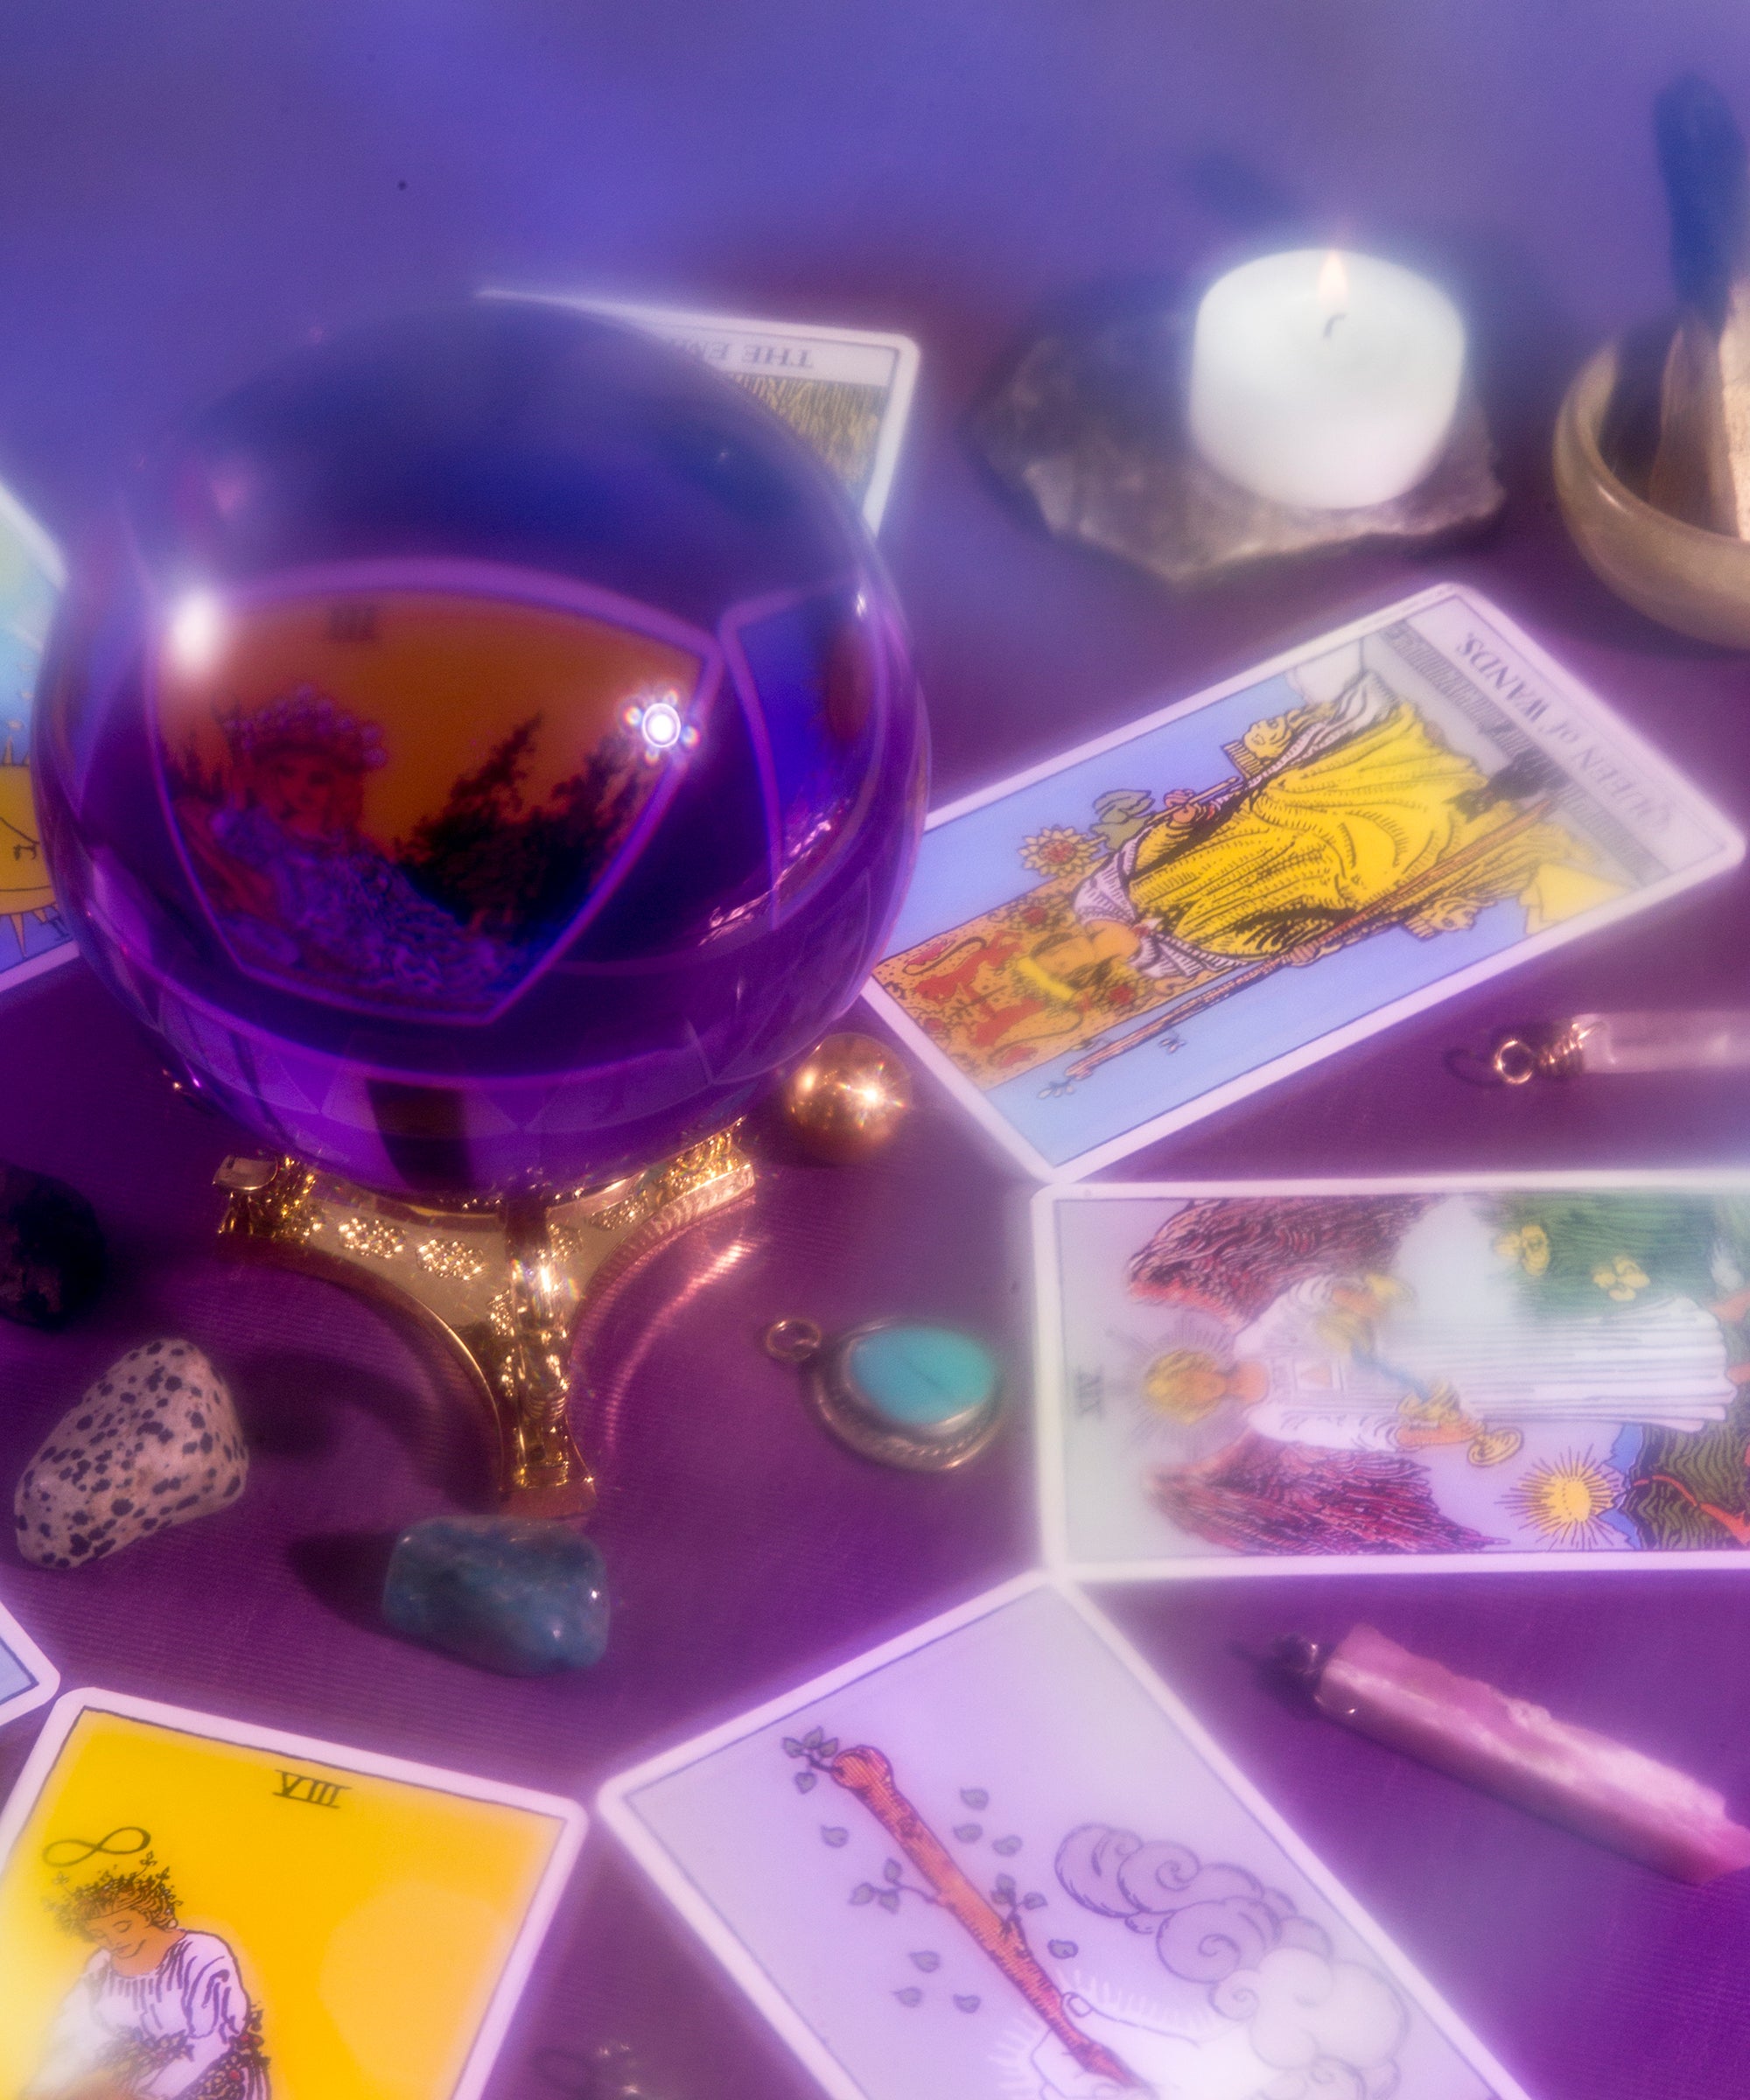 Best Online Psychic Reading & Mediums Reviewed 2020